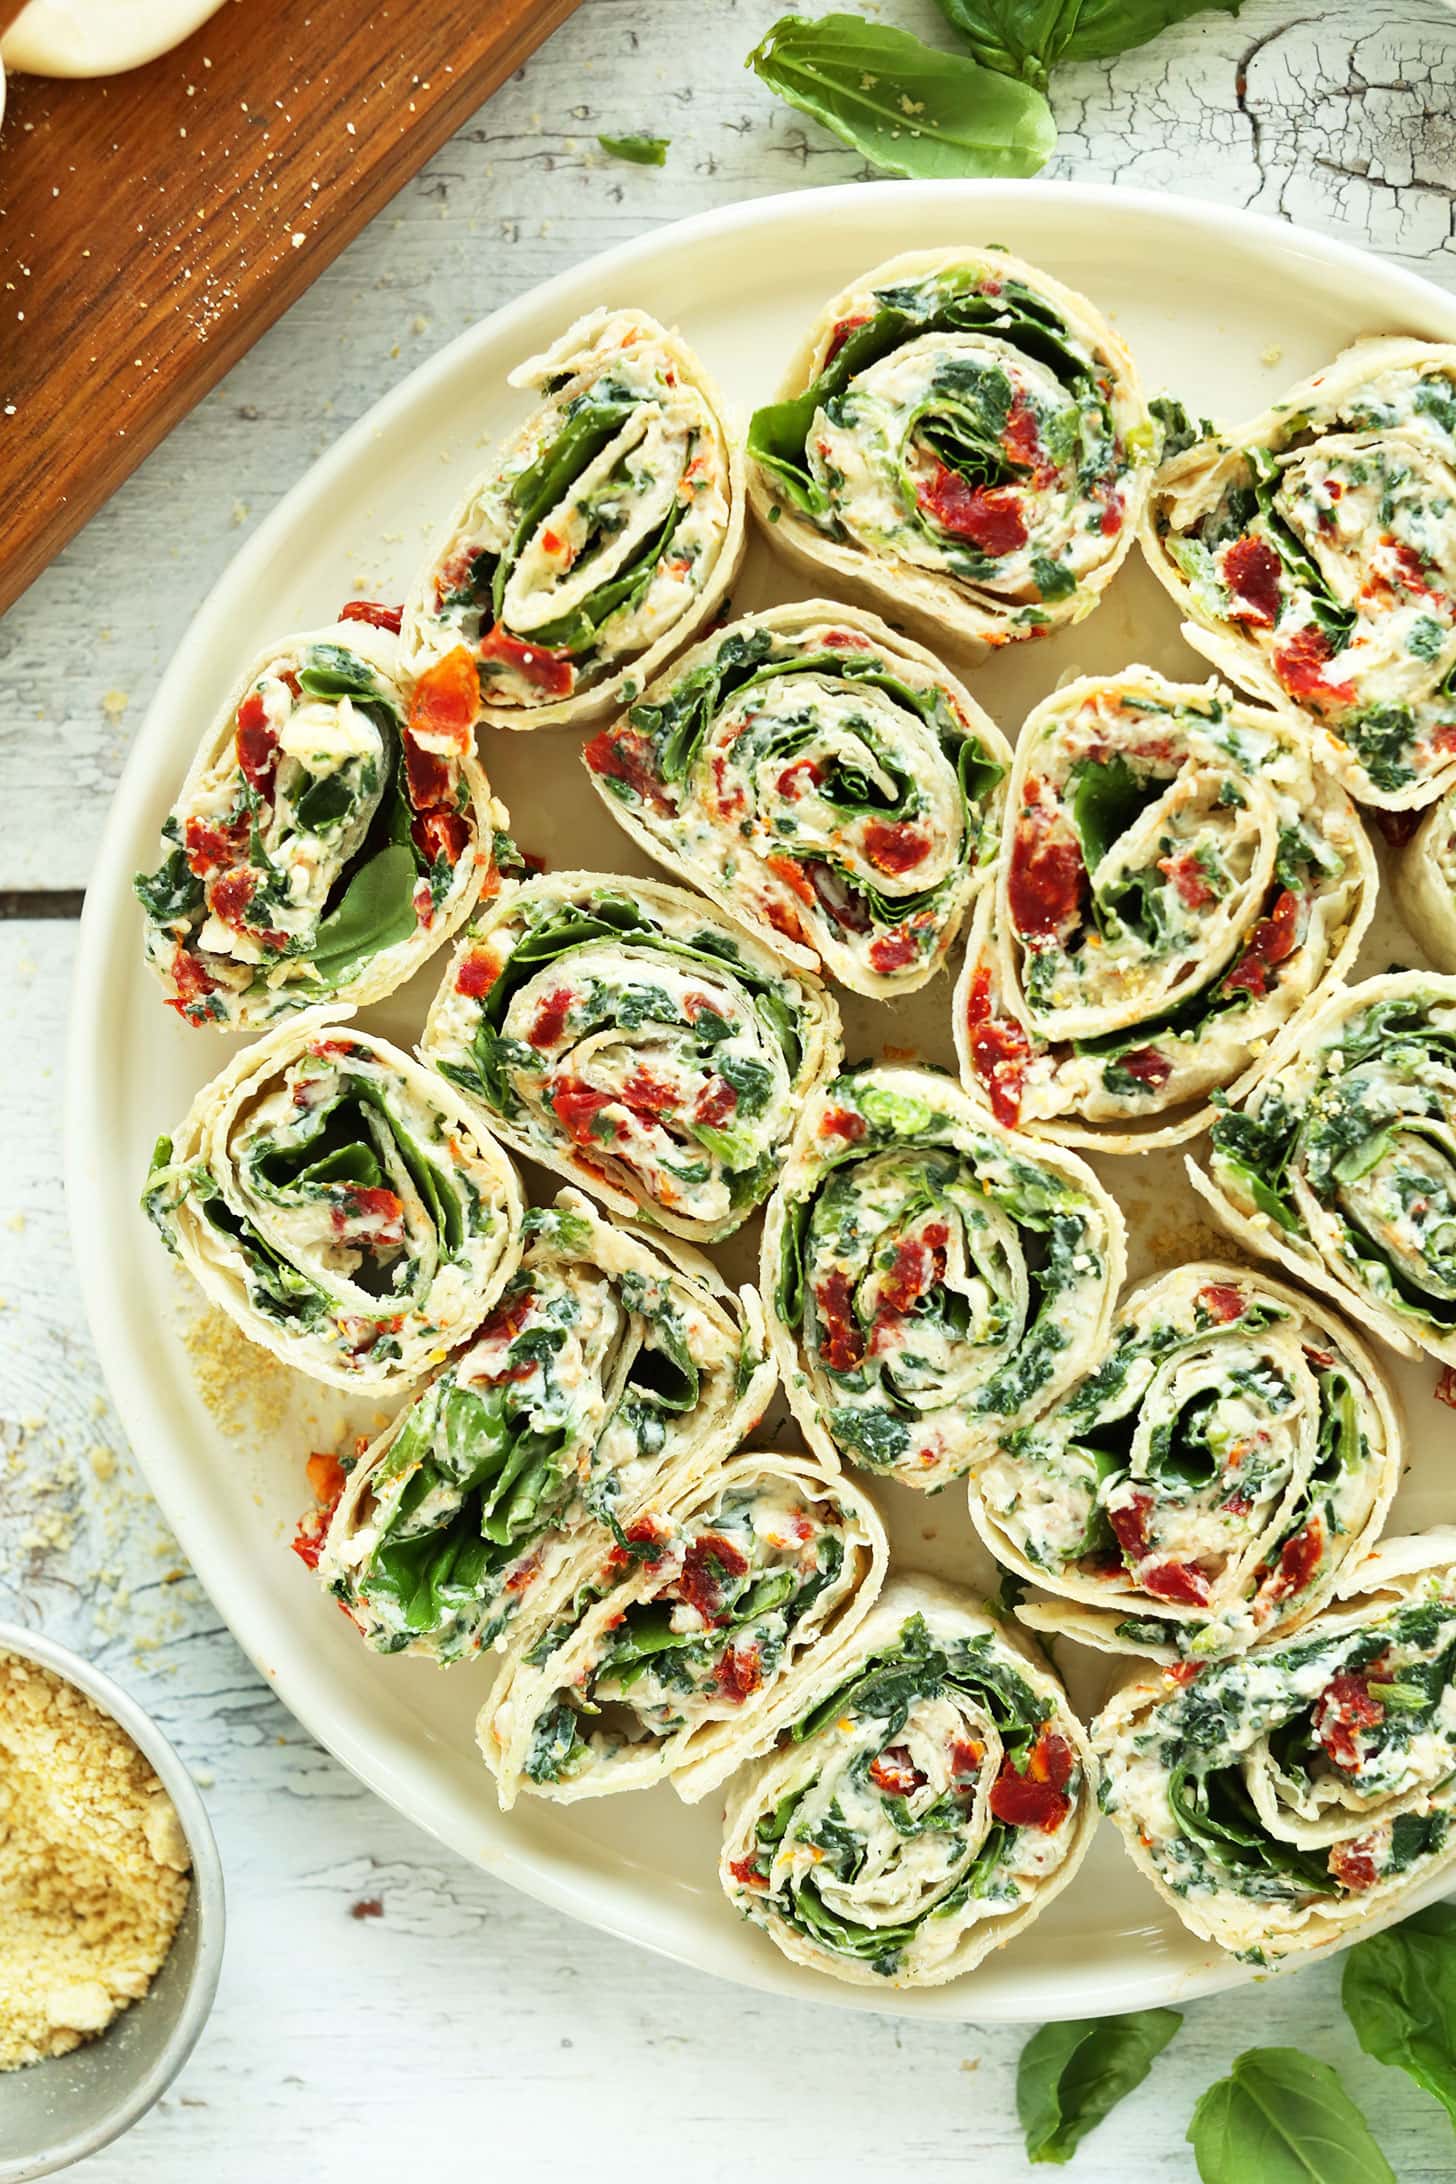 Tomato Basil Pinwheels with Spinach and Sun-Dried Tomatoes